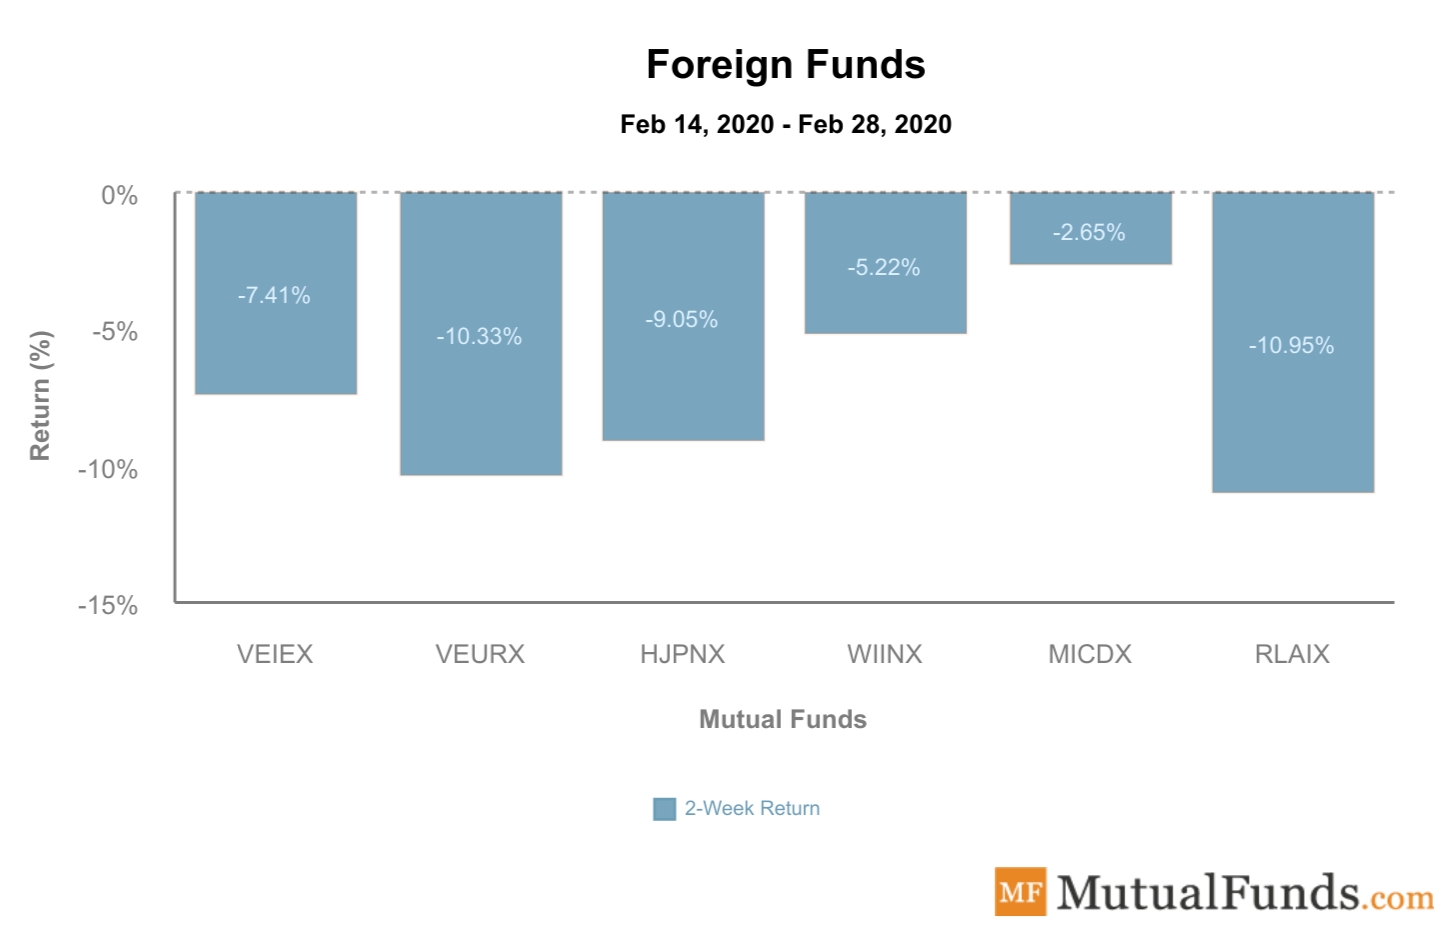 Foreign Funds Performance March 3, 2020